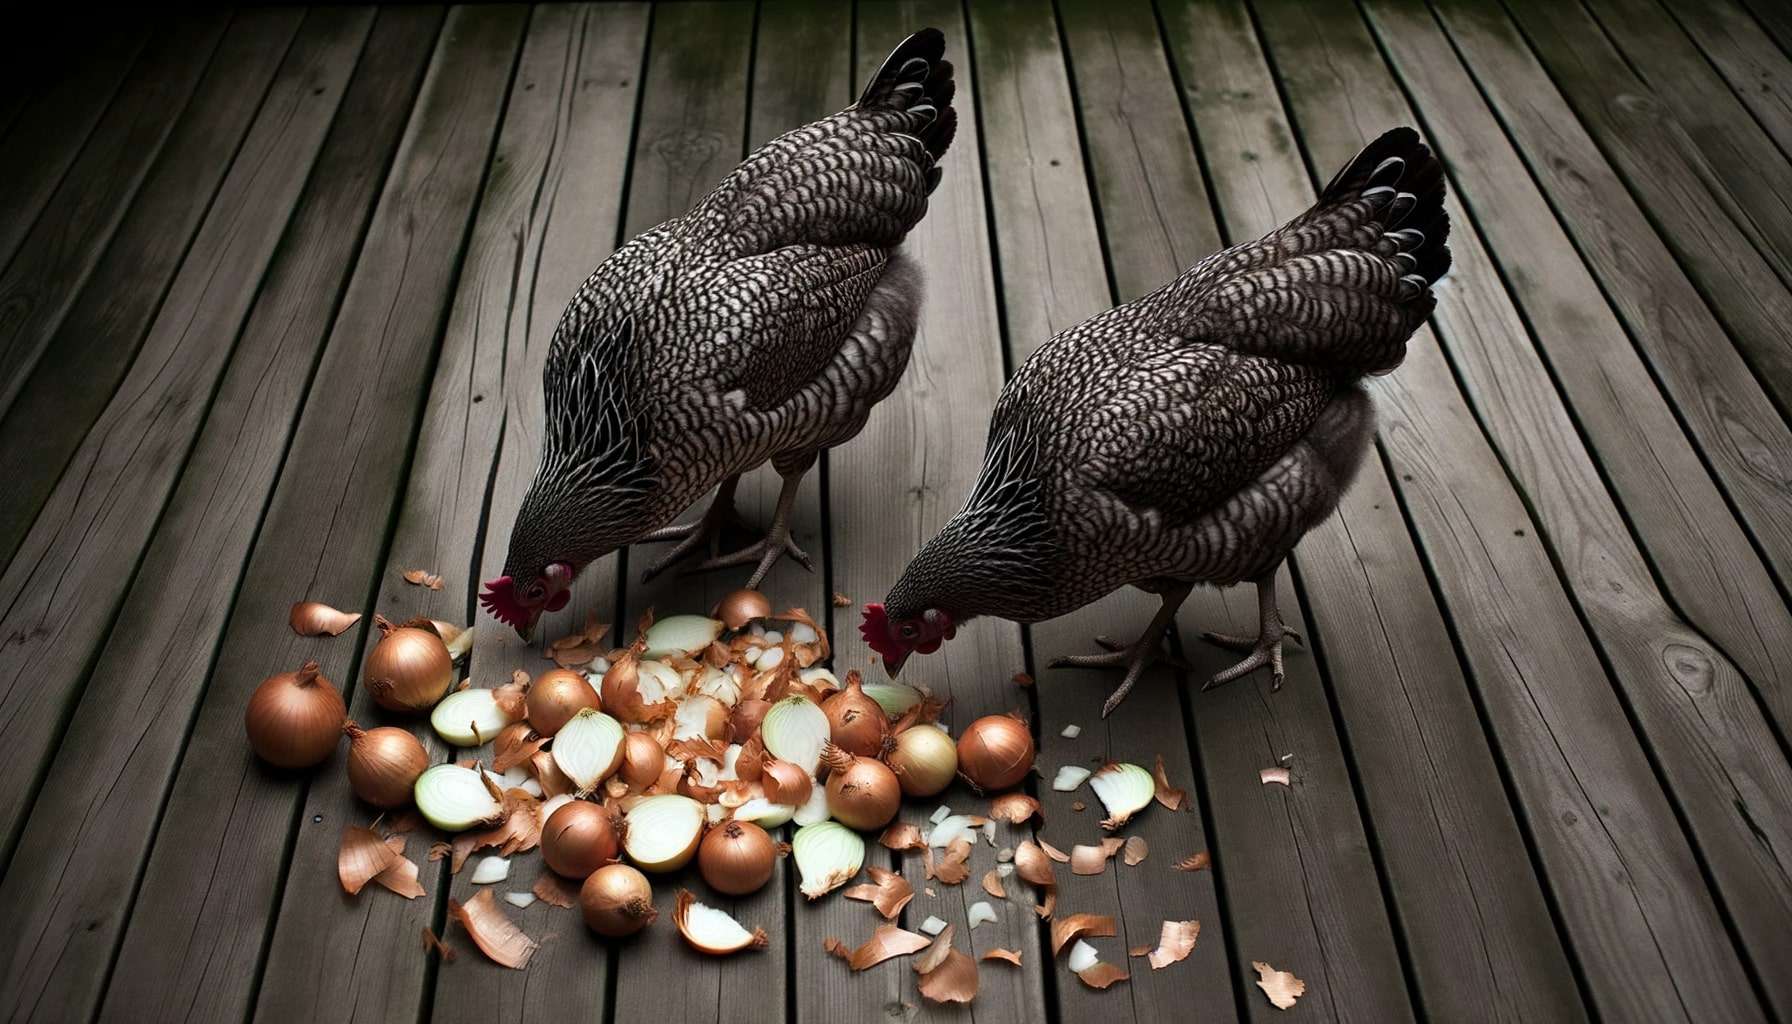 two dark-feathered on a wooden deck pecking on onions scraps